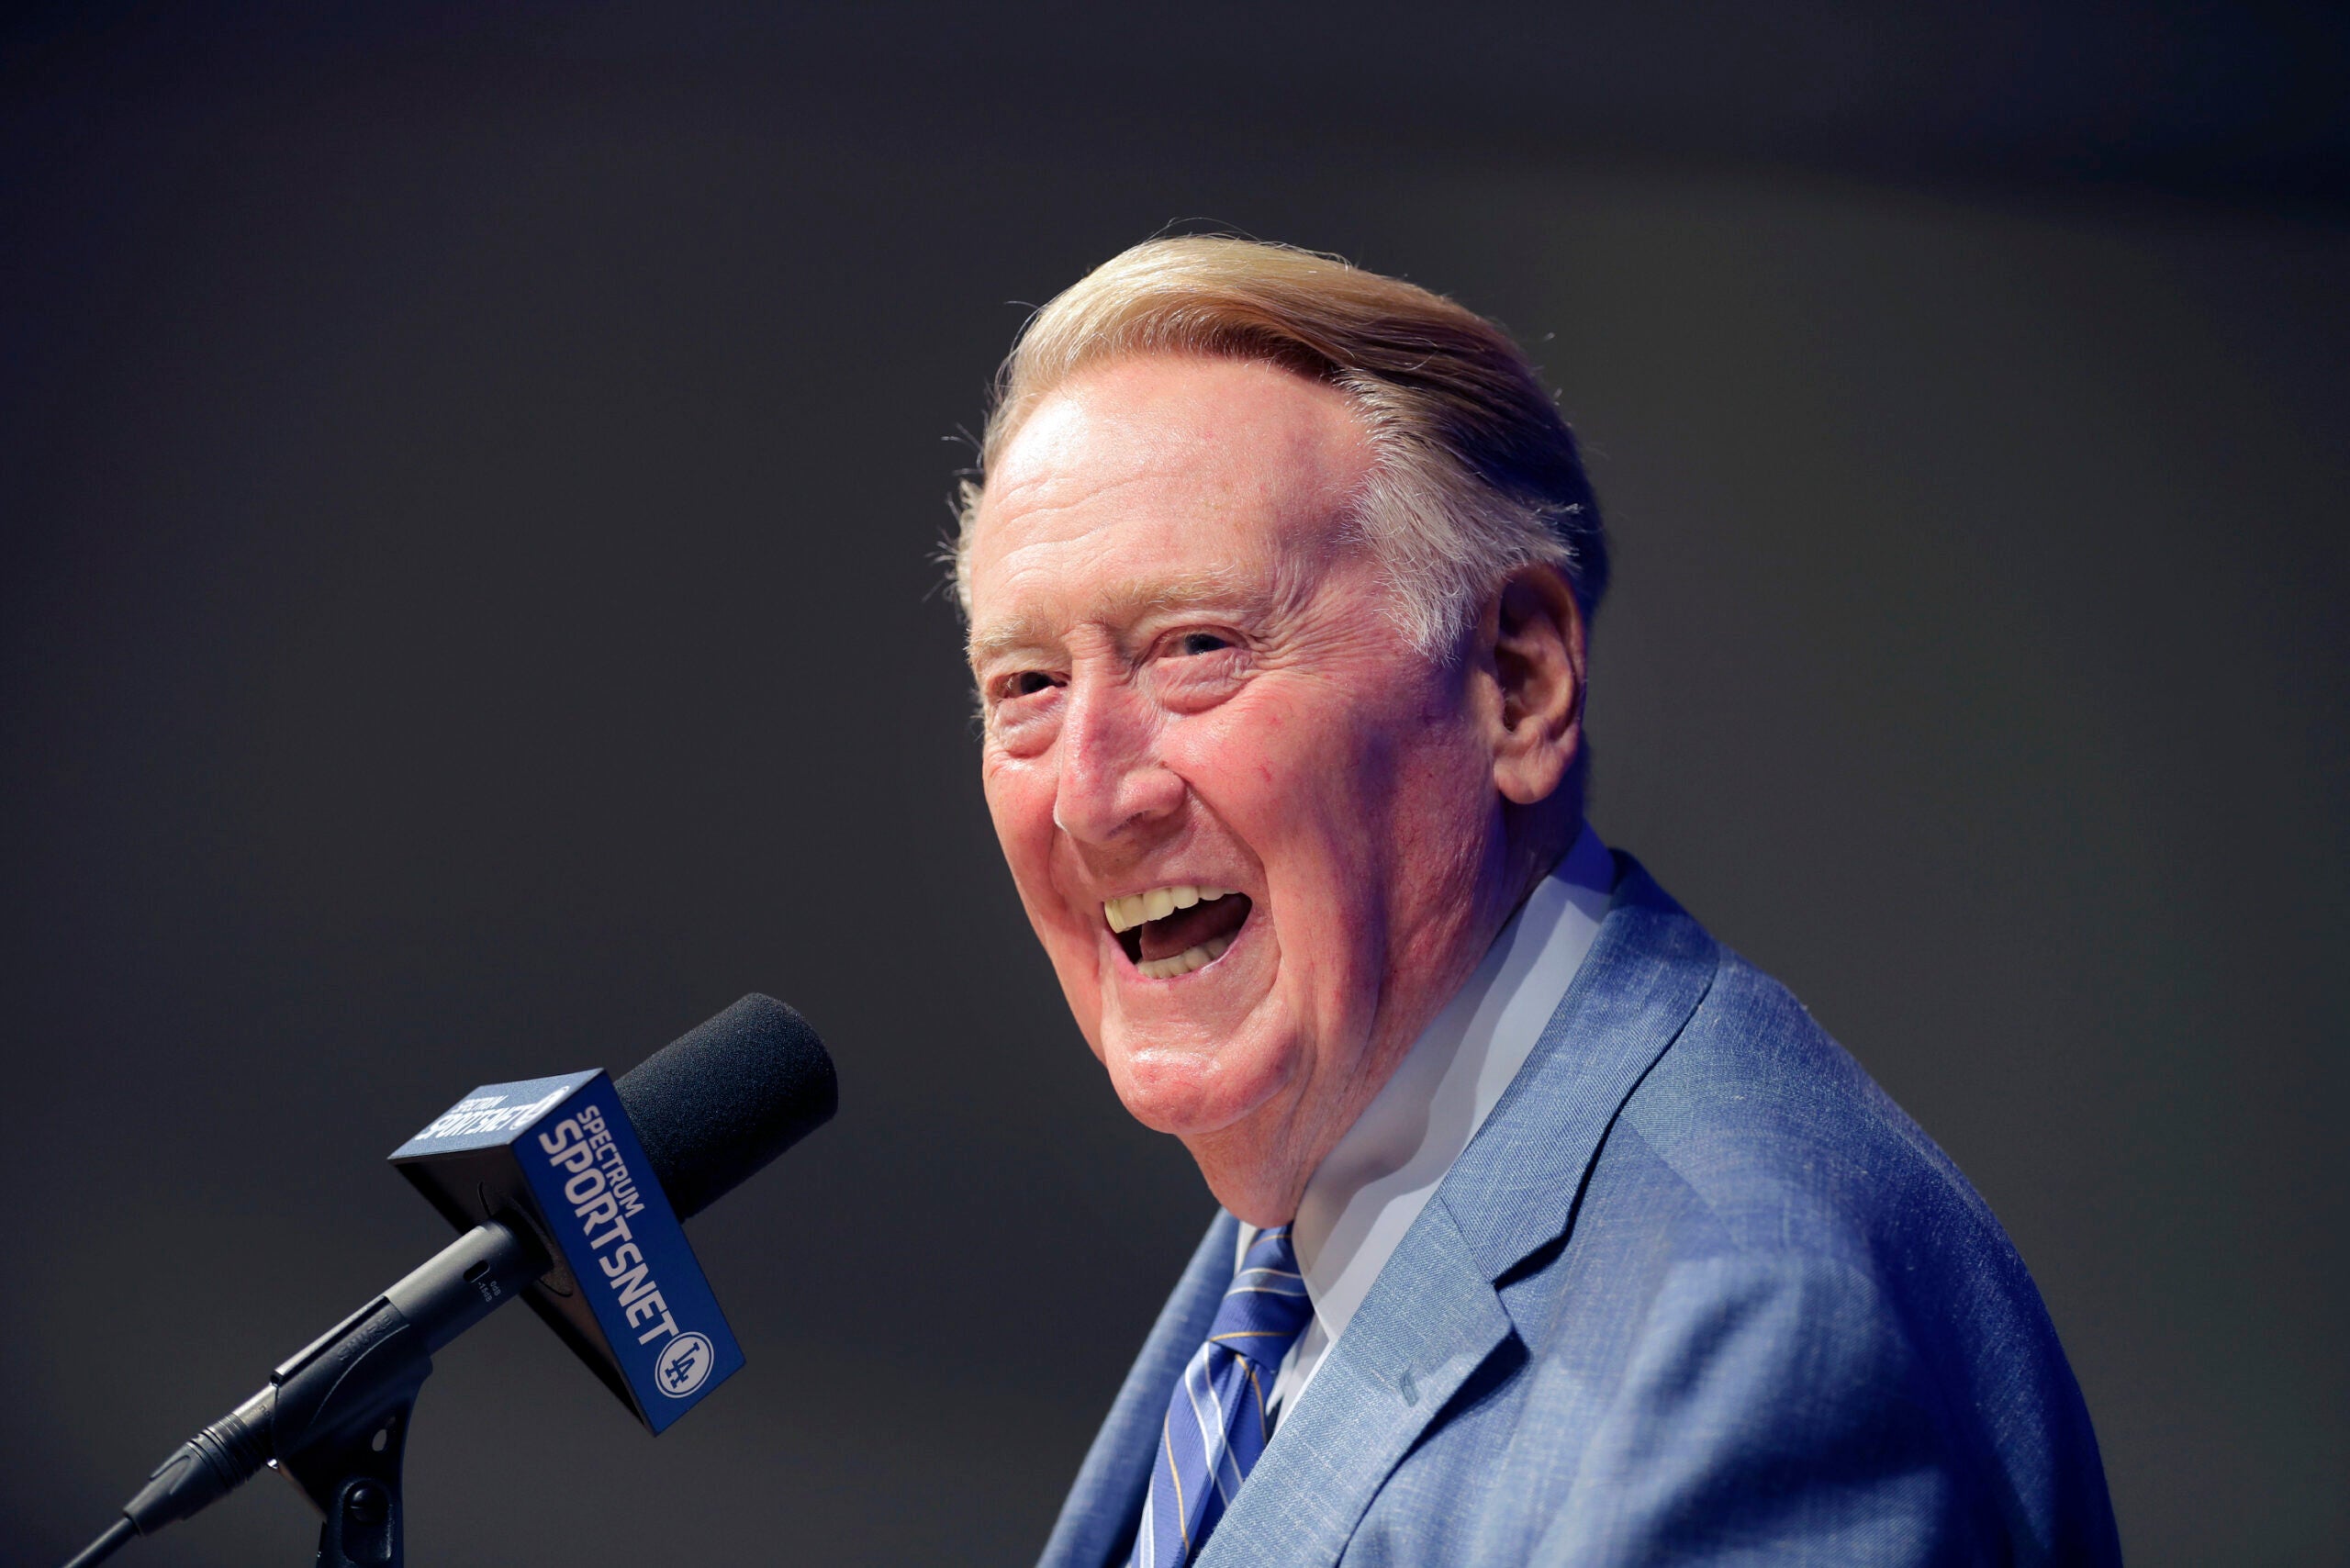 Hall of Fame broadcaster Vin Scully home from hospital after falling